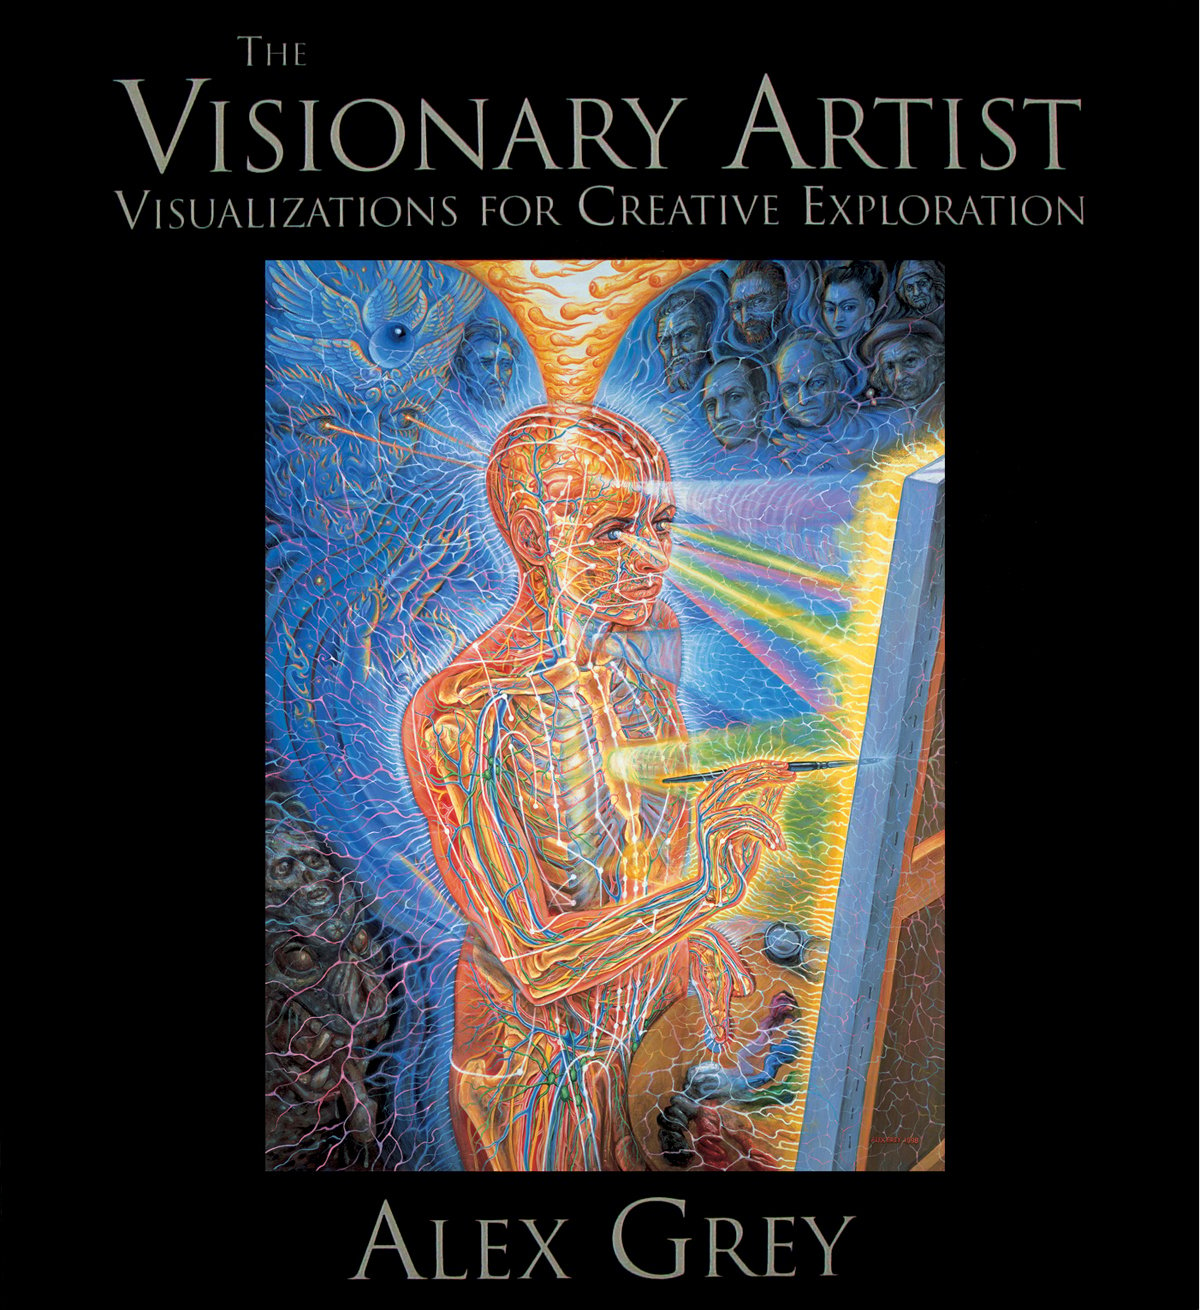 The Visionary Artist, 2000